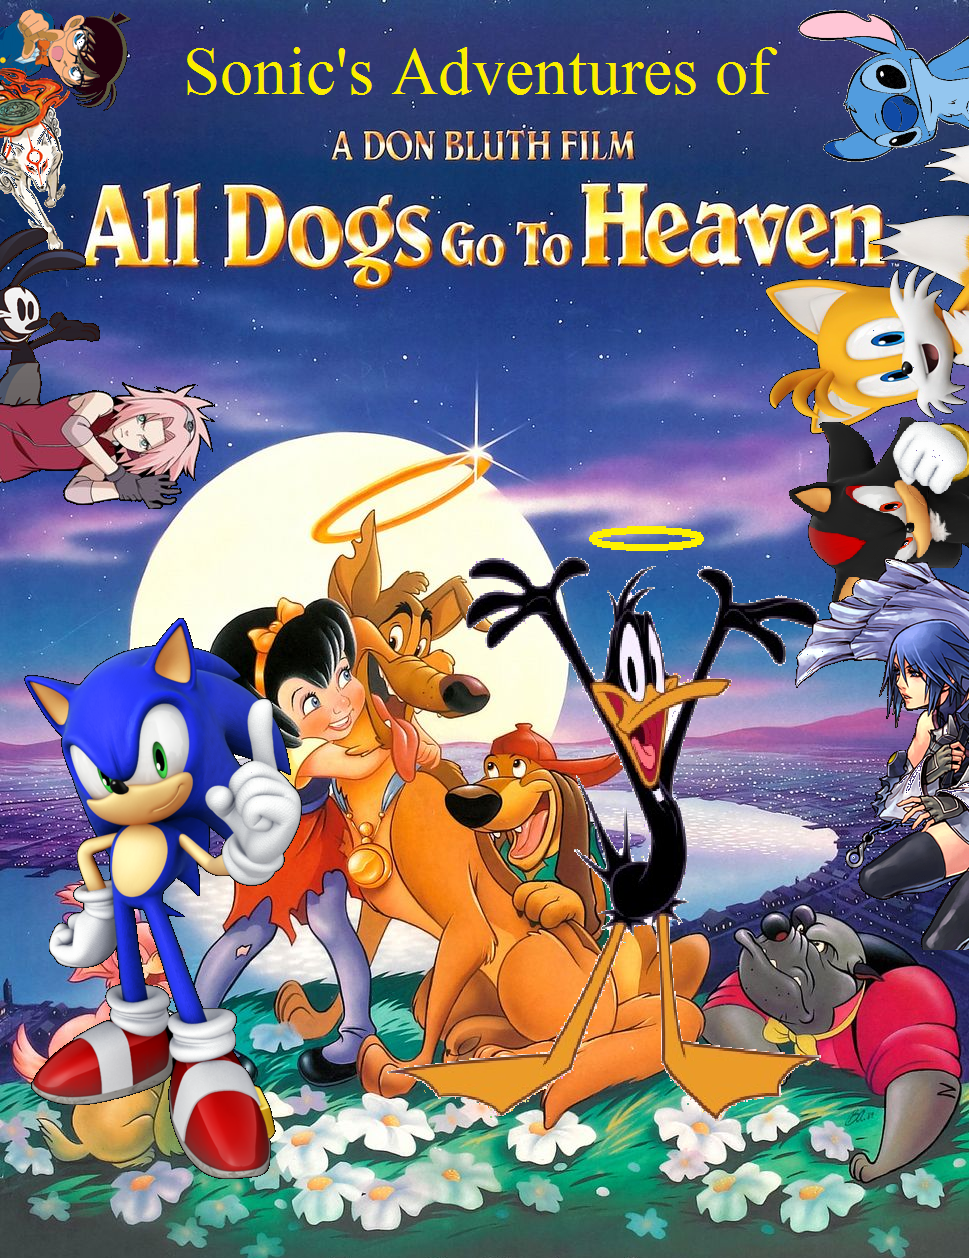 All Dogs Go To Heaven Backgrounds, Compatible - PC, Mobile, Gadgets| 969x1258 px